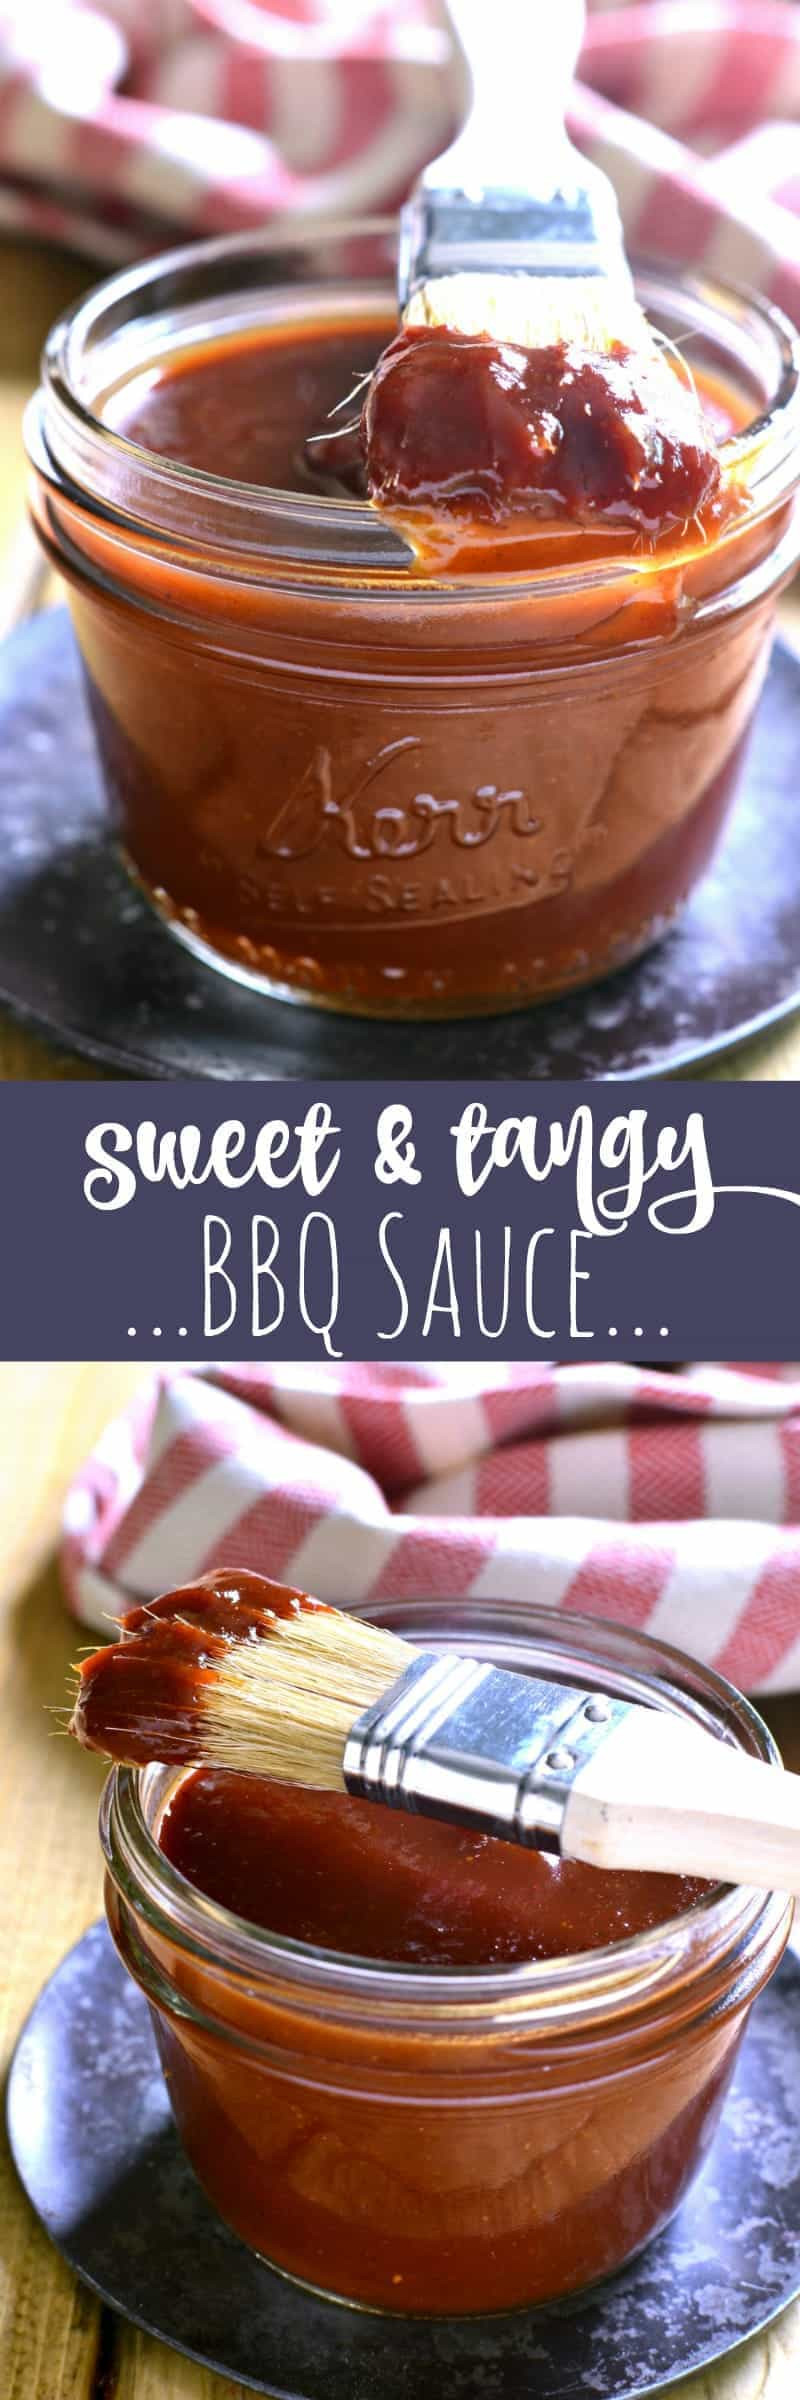 Sweet And Tangy Bbq Sauce
 Sweet & Tangy BBQ Sauce